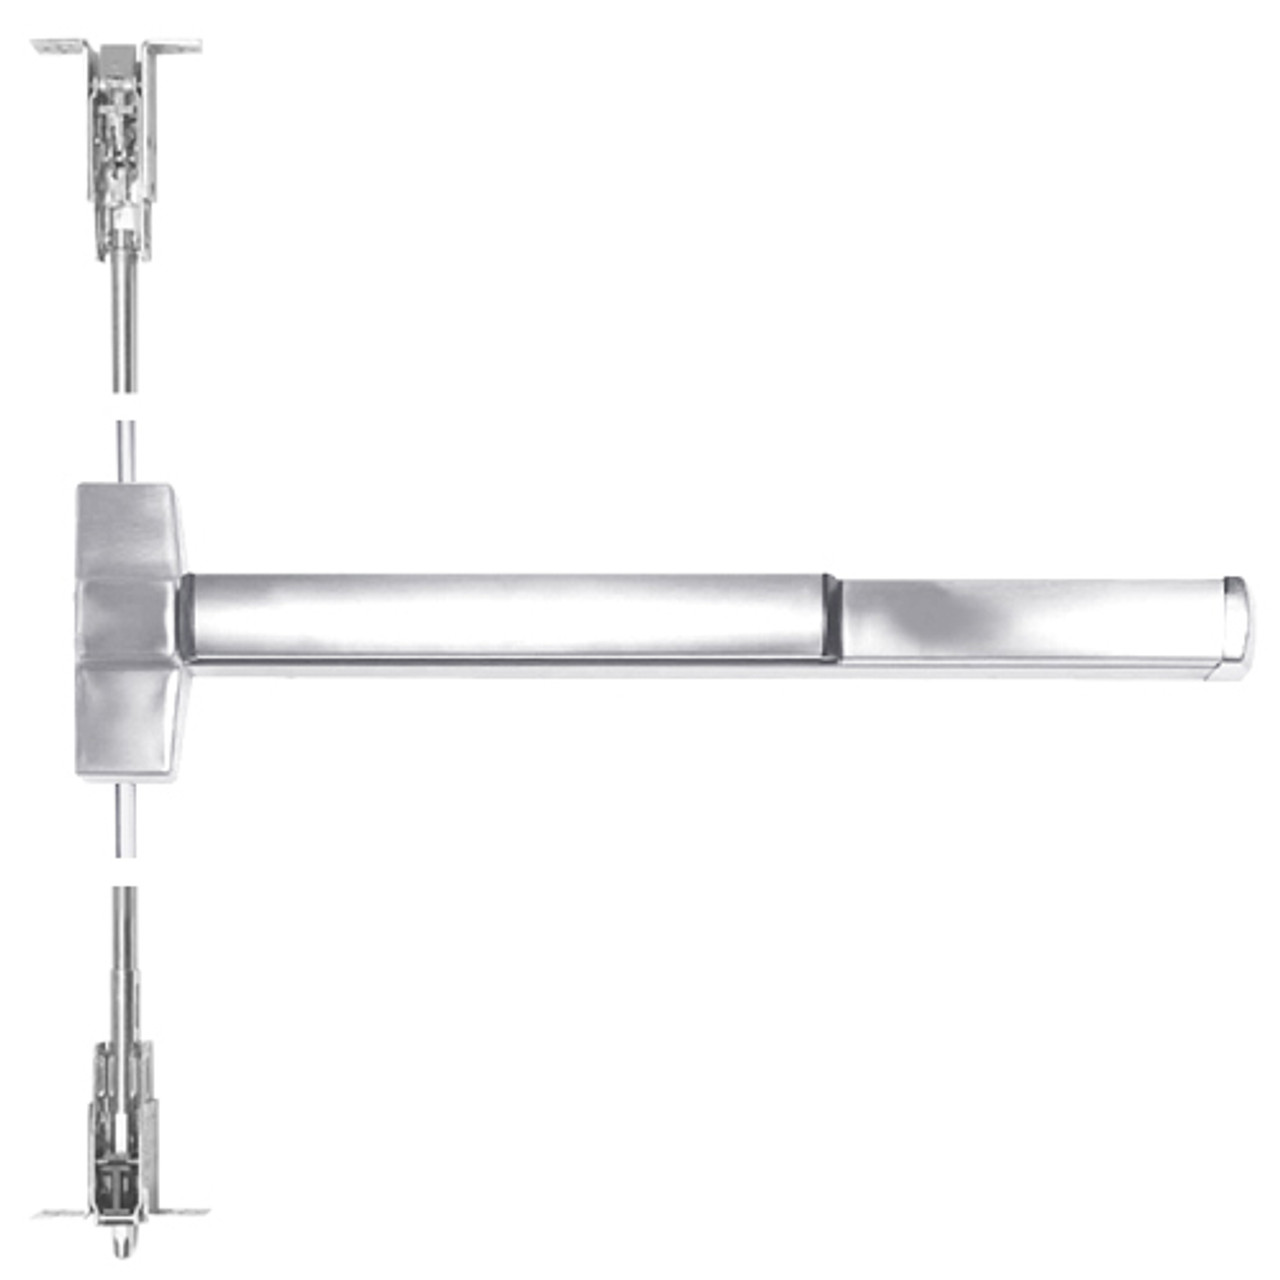 ED5860B-625-W048-MELR-M92 Corbin ED5800 Series Fire Rated Concealed Vertical Rod Device with Motor Latch Retraction and Touchbar Monitoring in Bright Chrome Finish